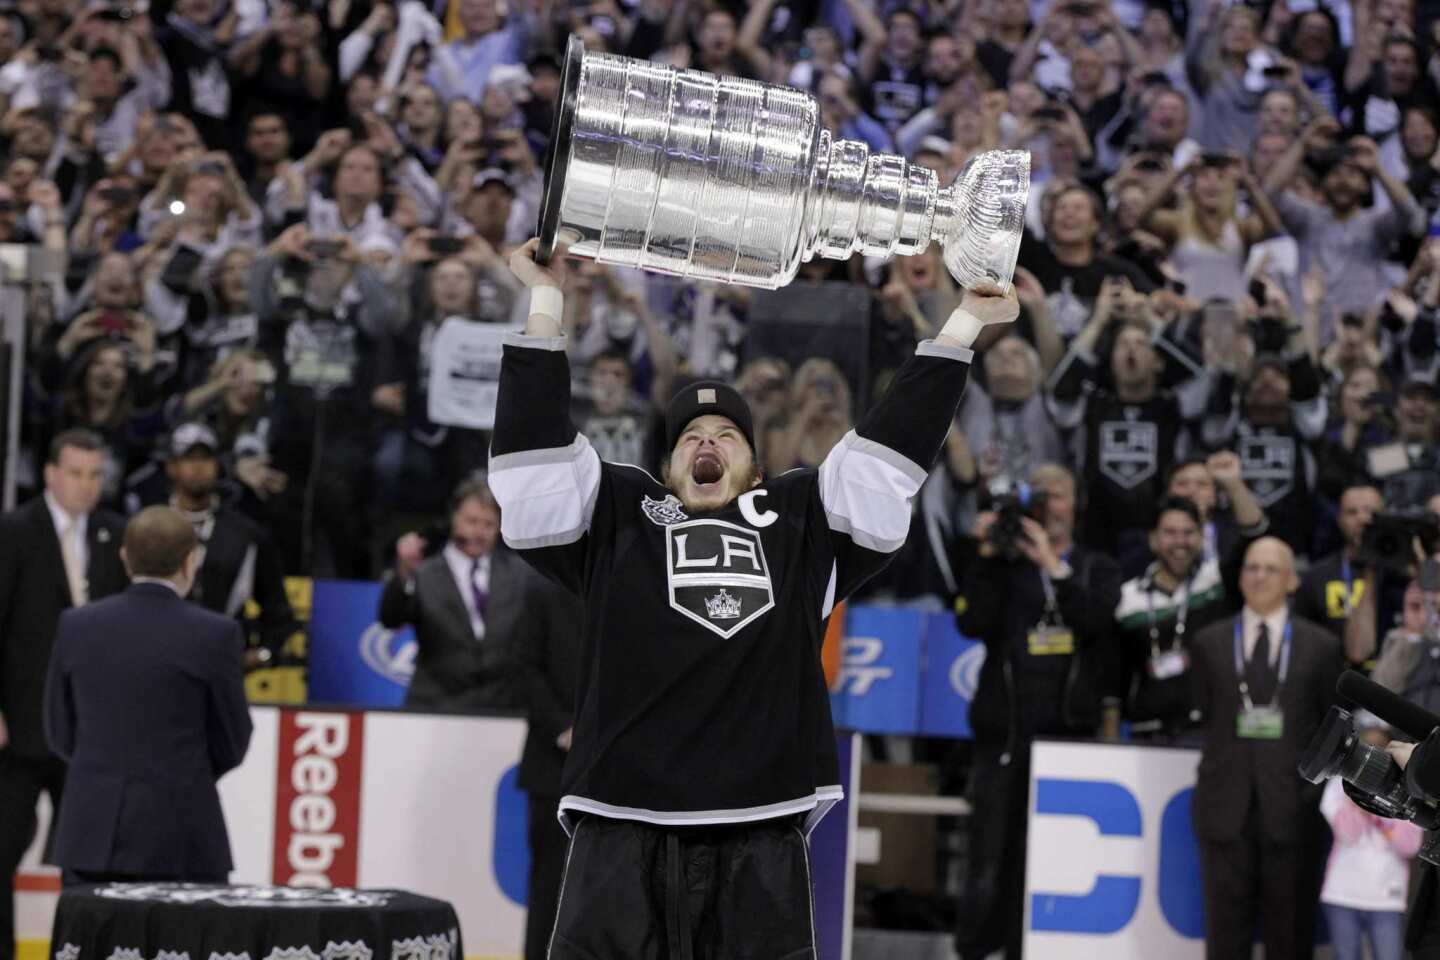 Kings center and captain Dustin Brown lets out a yell as he hoists the Stanley Cup overhead during his lap around the ice following a 6-1 victory over the New Jersey Devils in Game 6 on Monday night at Staples Center. Los Angeles won its first NHL championship after 45 years.